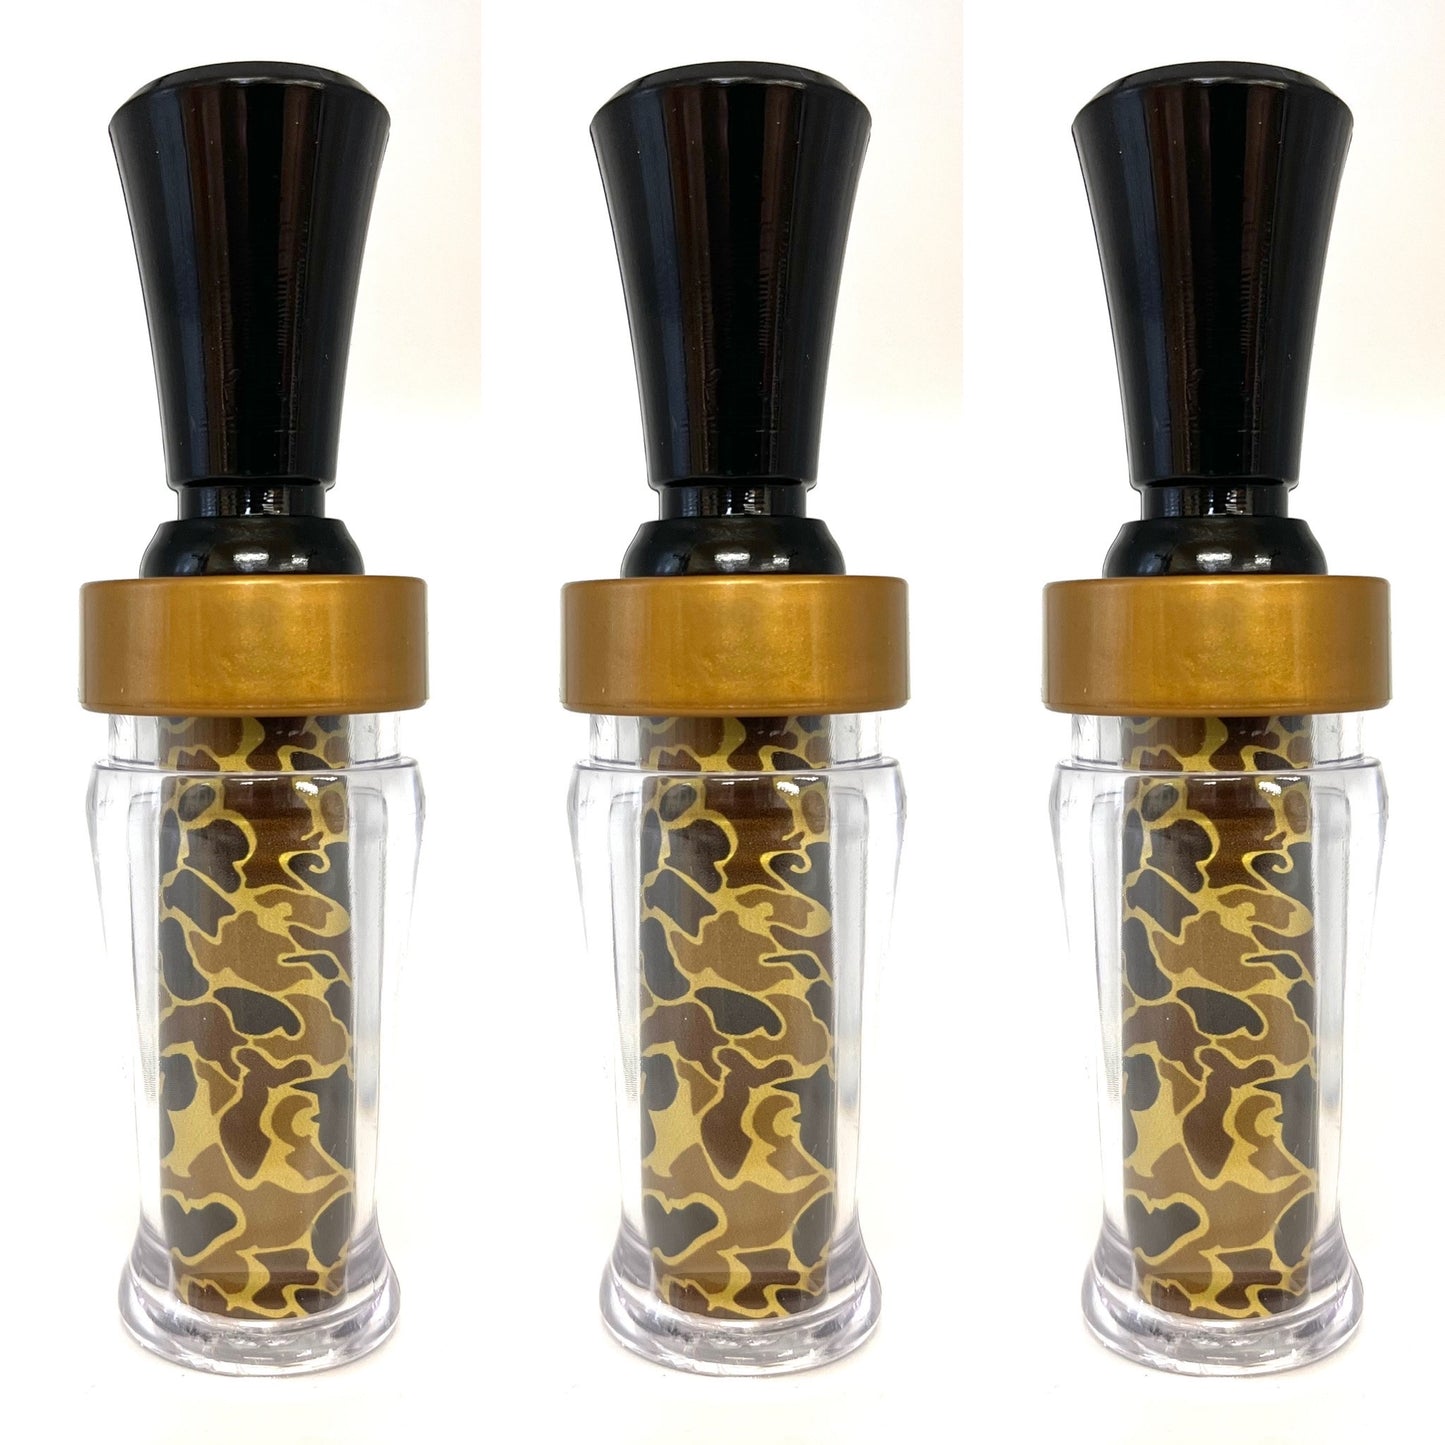 POLYCARBONATE IMAGE DUCK CALL OLD SCHOOL